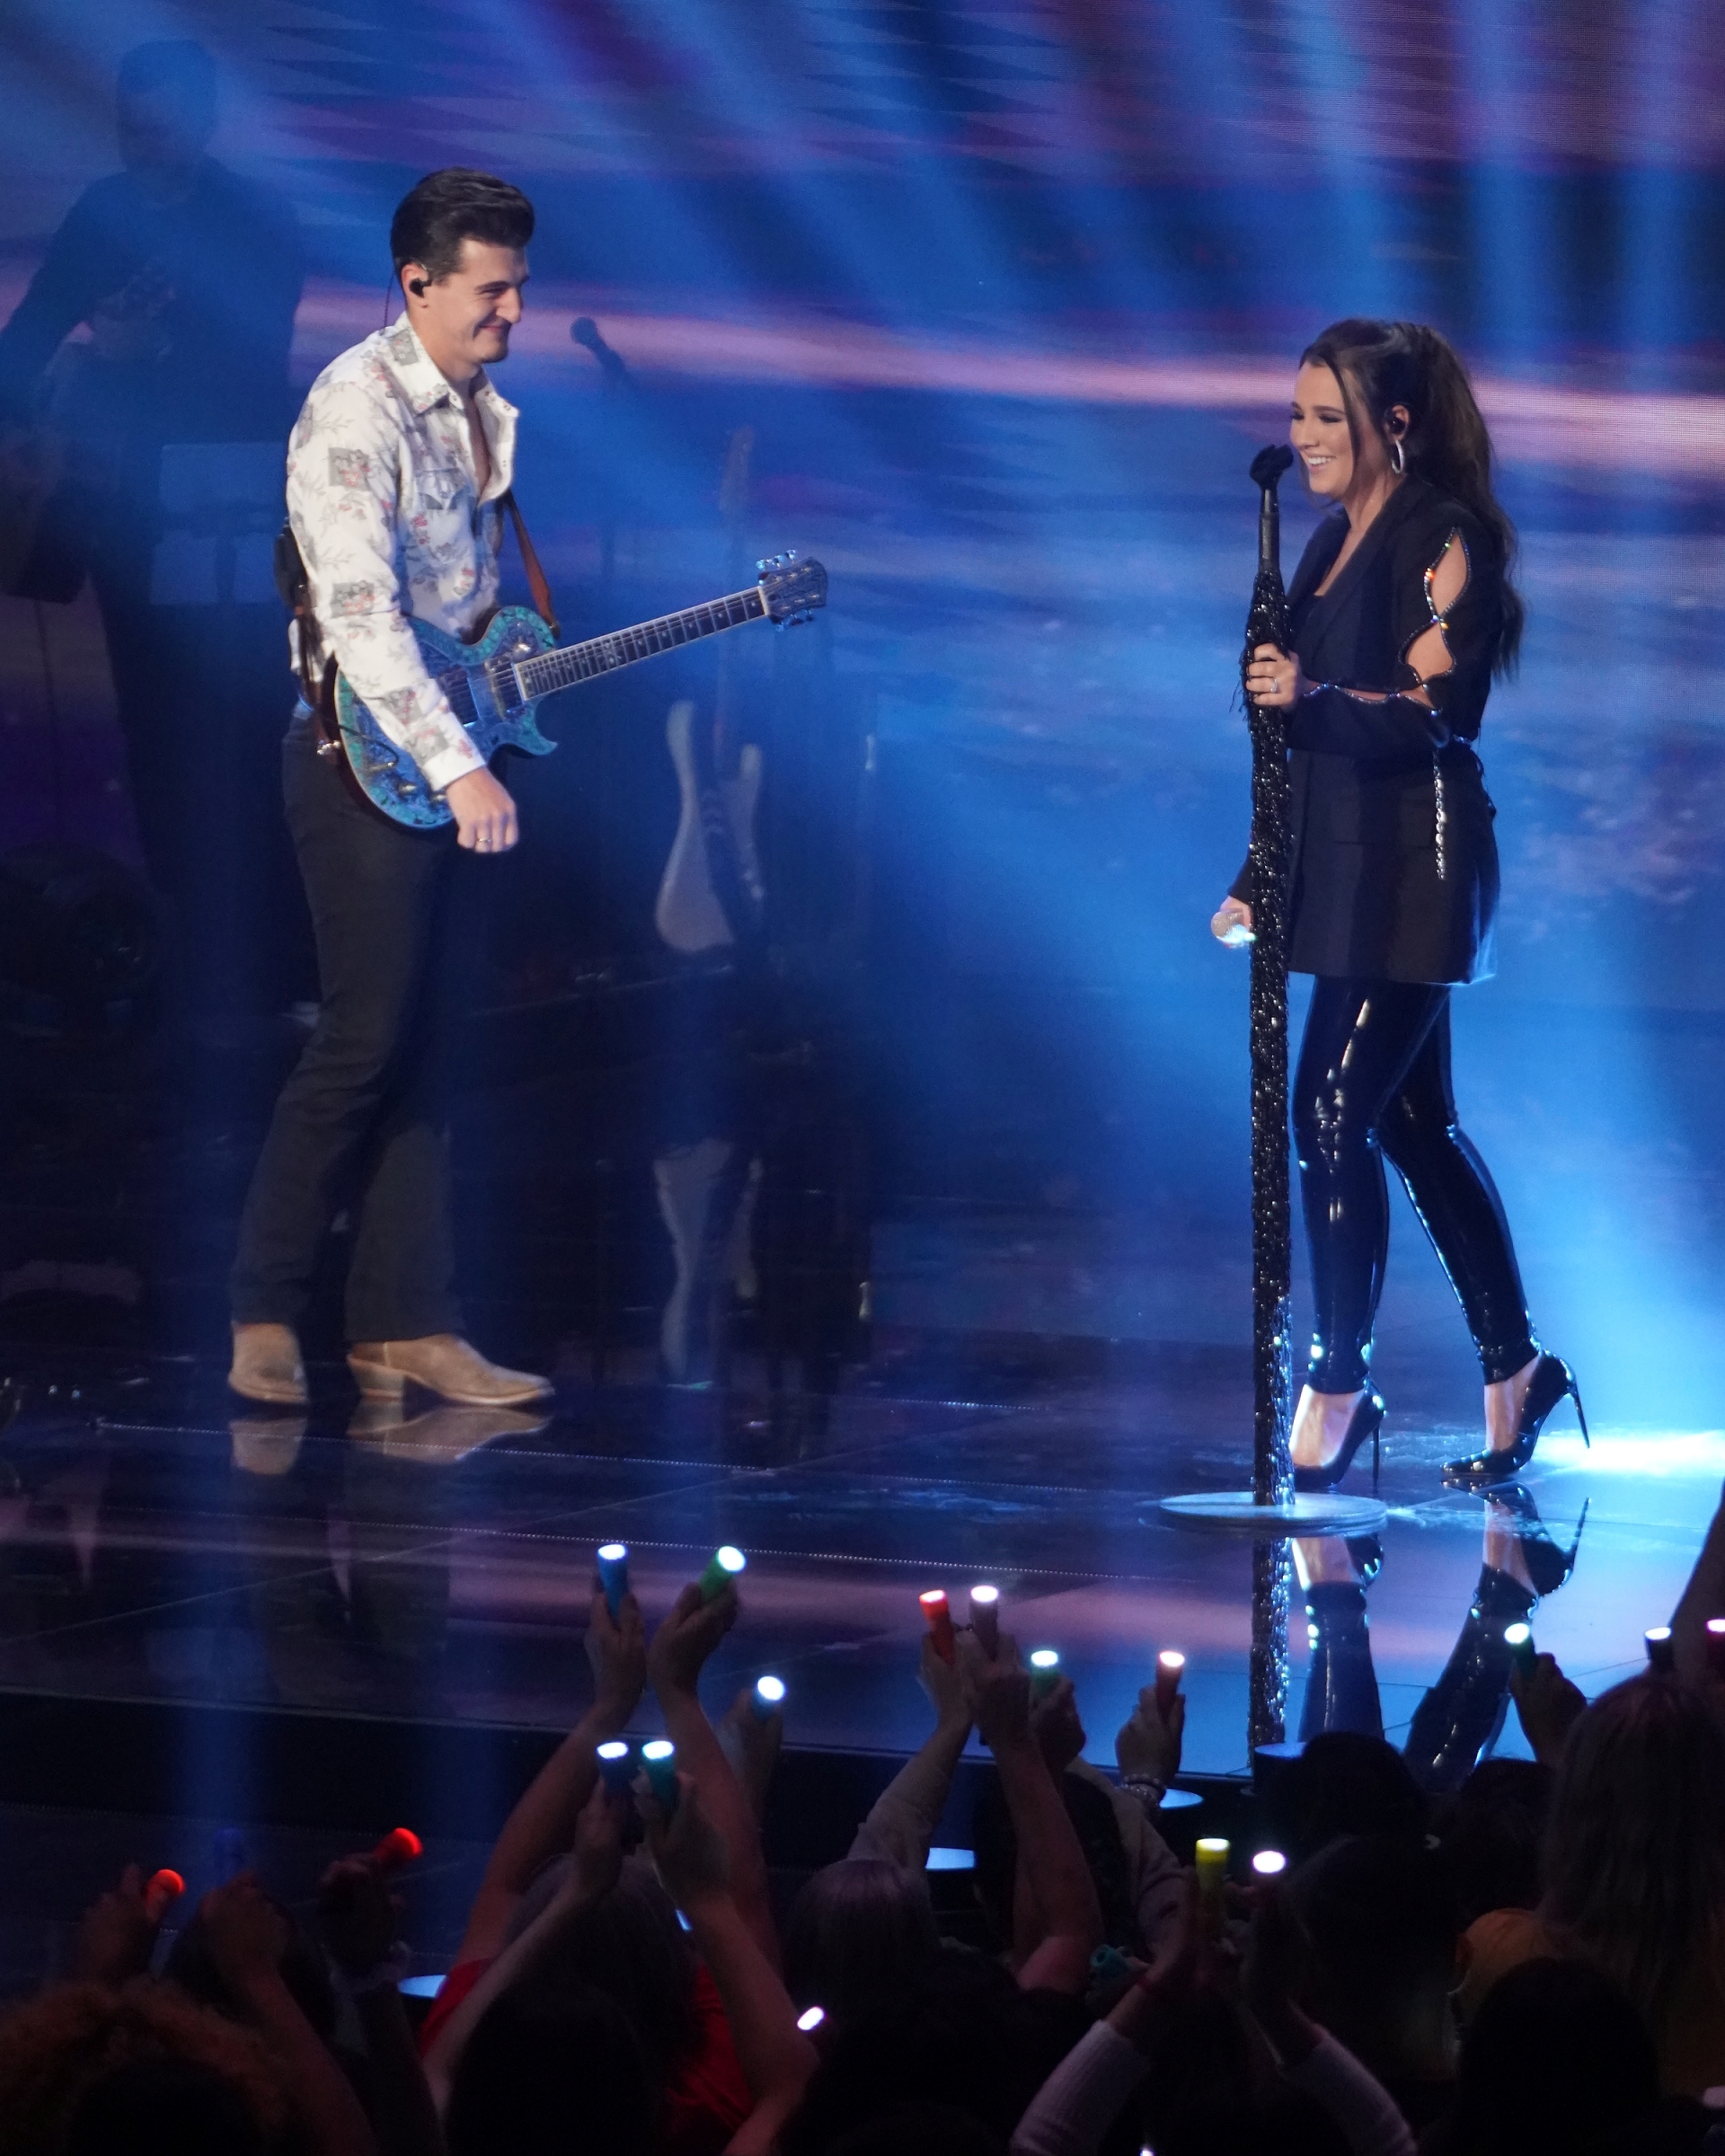 Gabby Barrett performs "Pick Me Up" during the American Idol Grand Finale with husband Cade Foehner on May 22, 2022.
